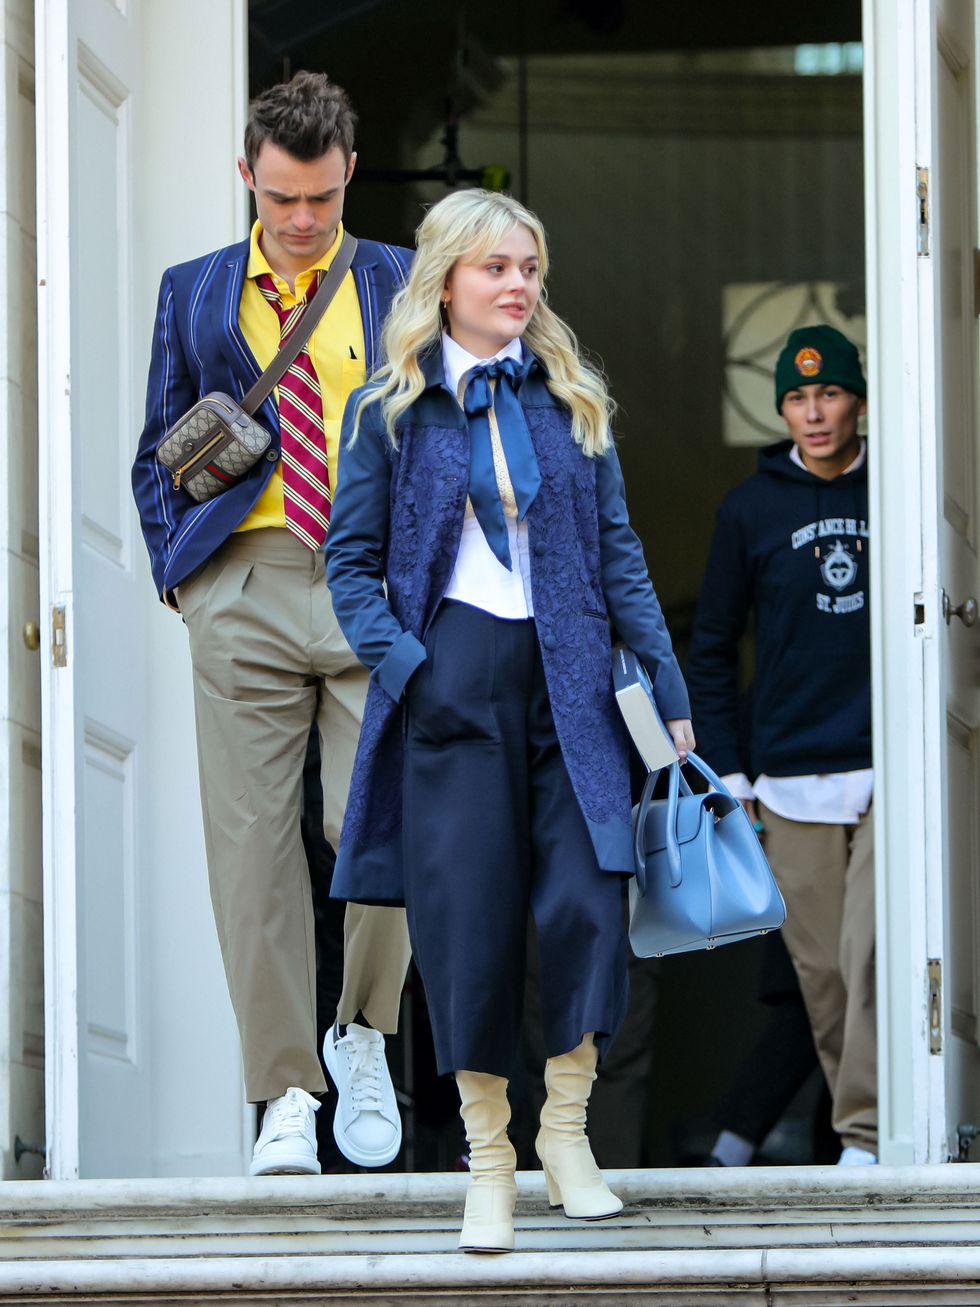 Gossip Girl Reboot 1x05 Clothes, Style, Outfits, Fashion, Looks